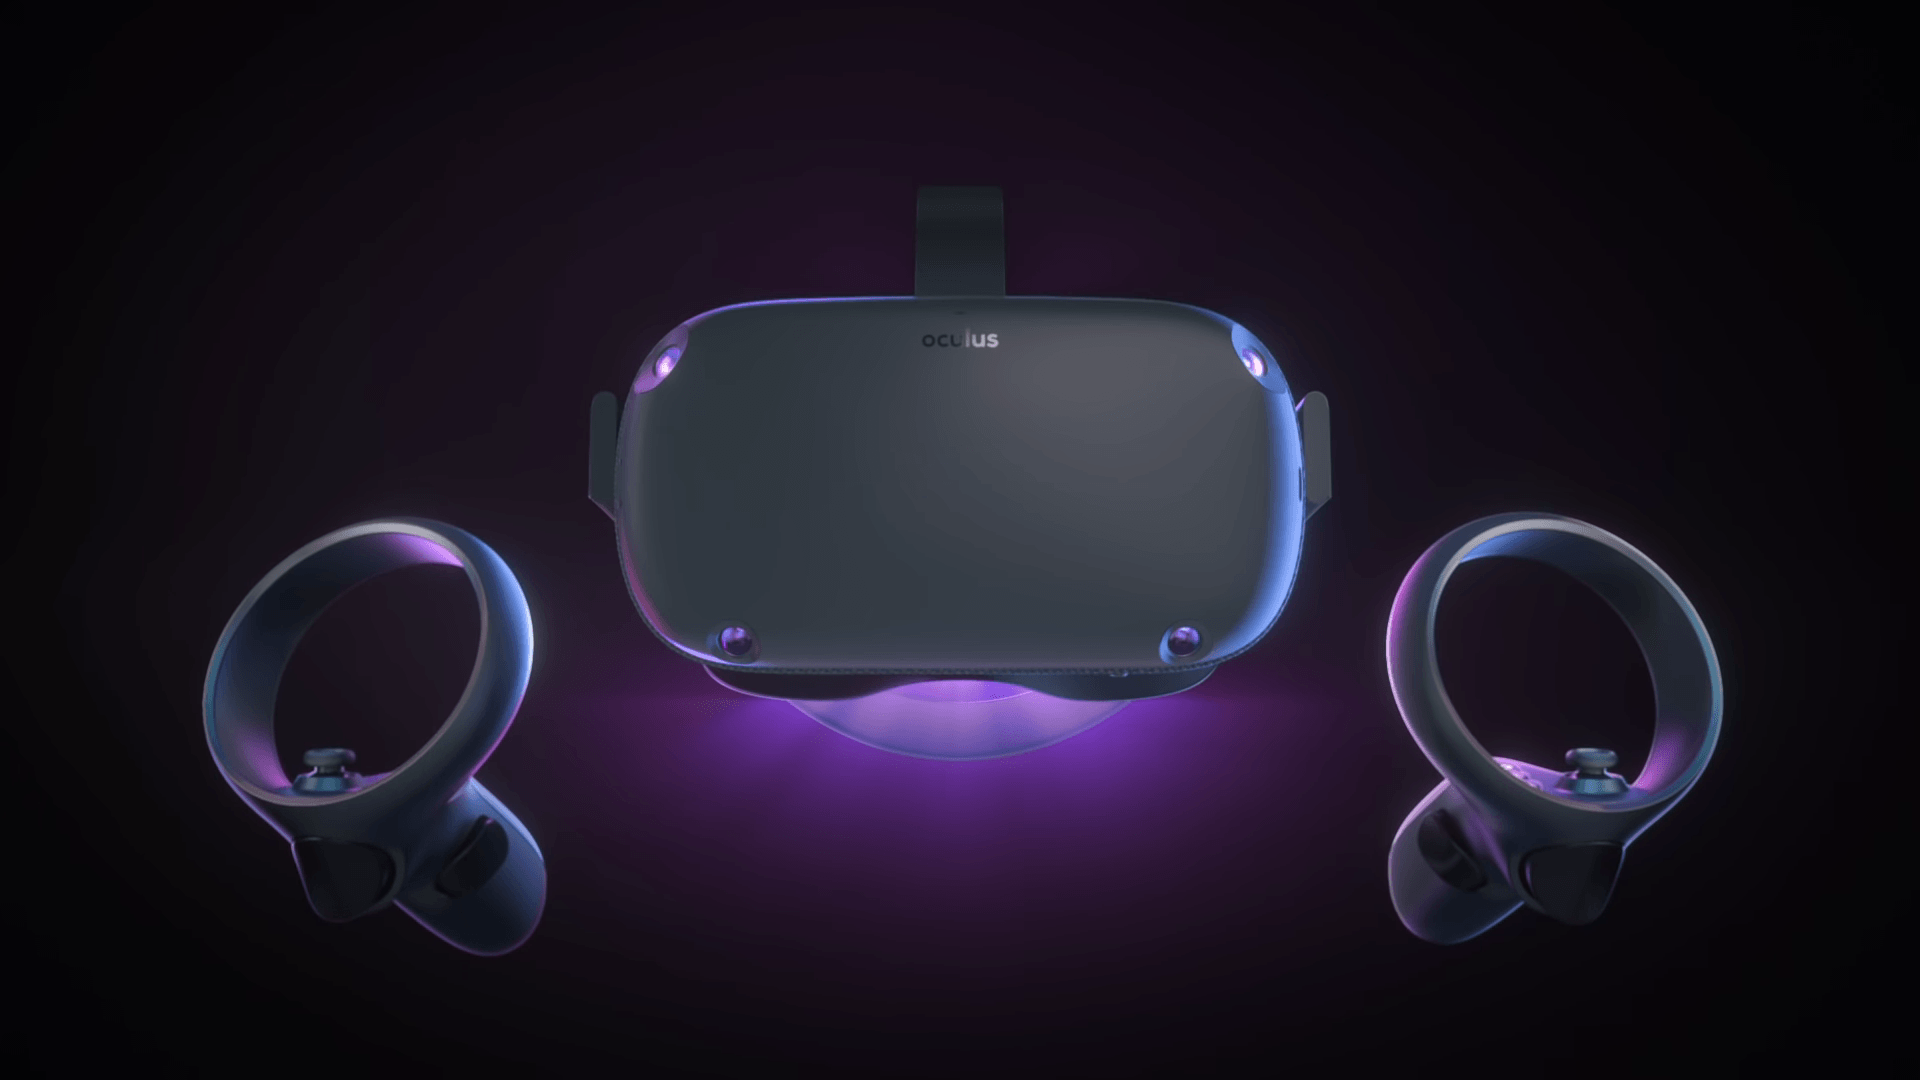 Taking VR Gaming Mainstream: Standalone Headsets Like Oculus Quest Lead the Way